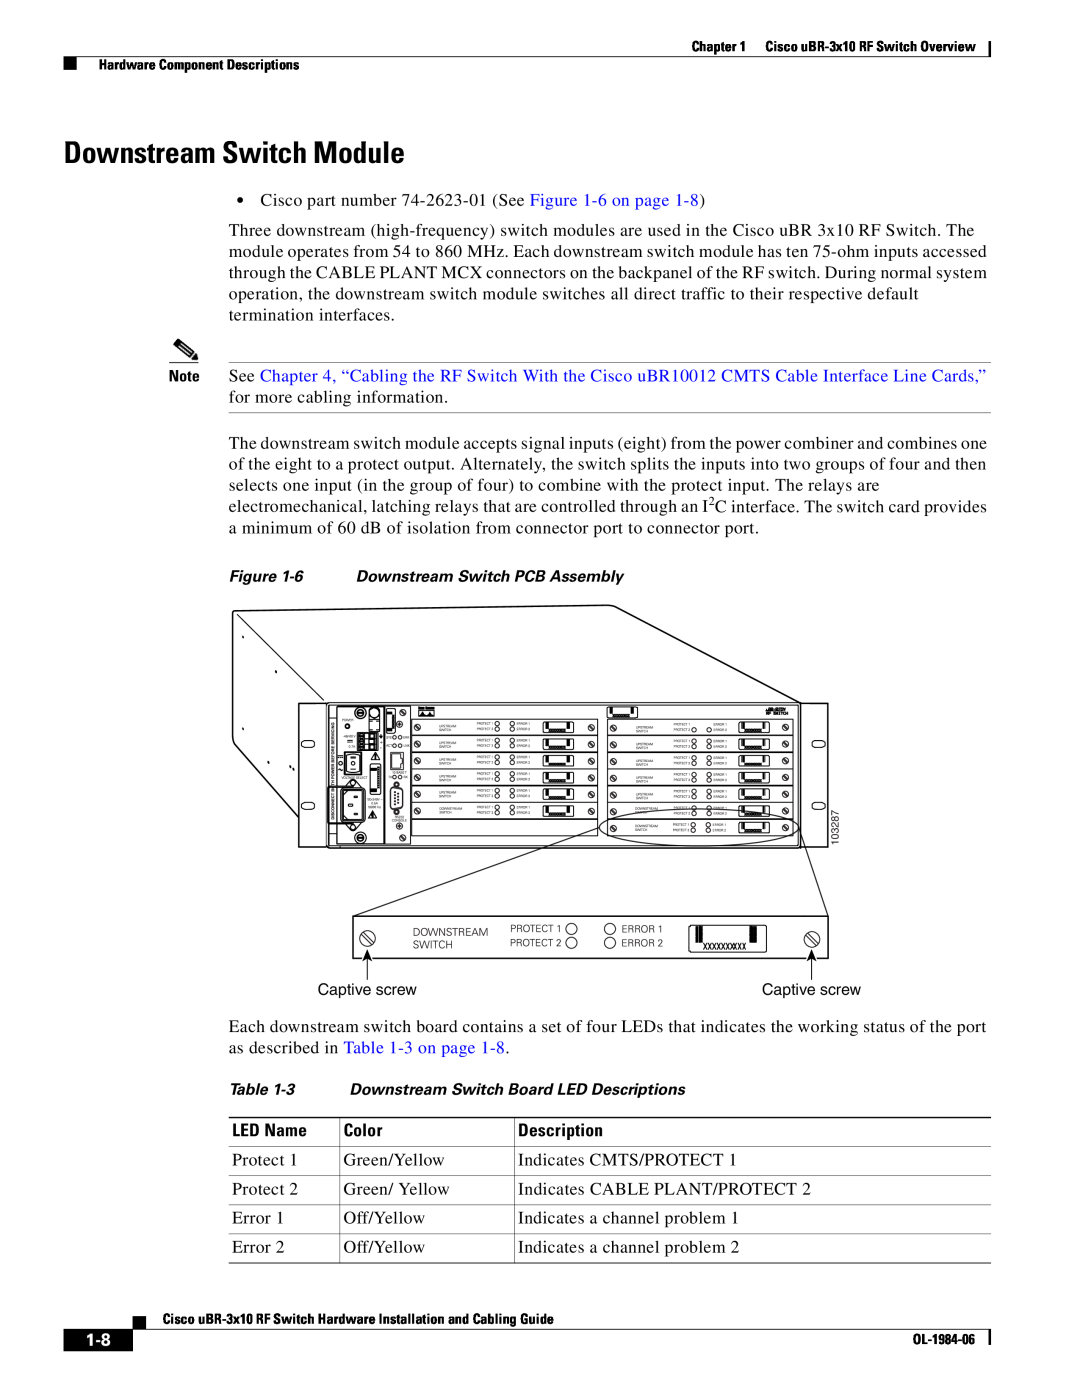 Cisco Systems UBR-3X10 manual Downstream Switch Module, as described in -3 on page 